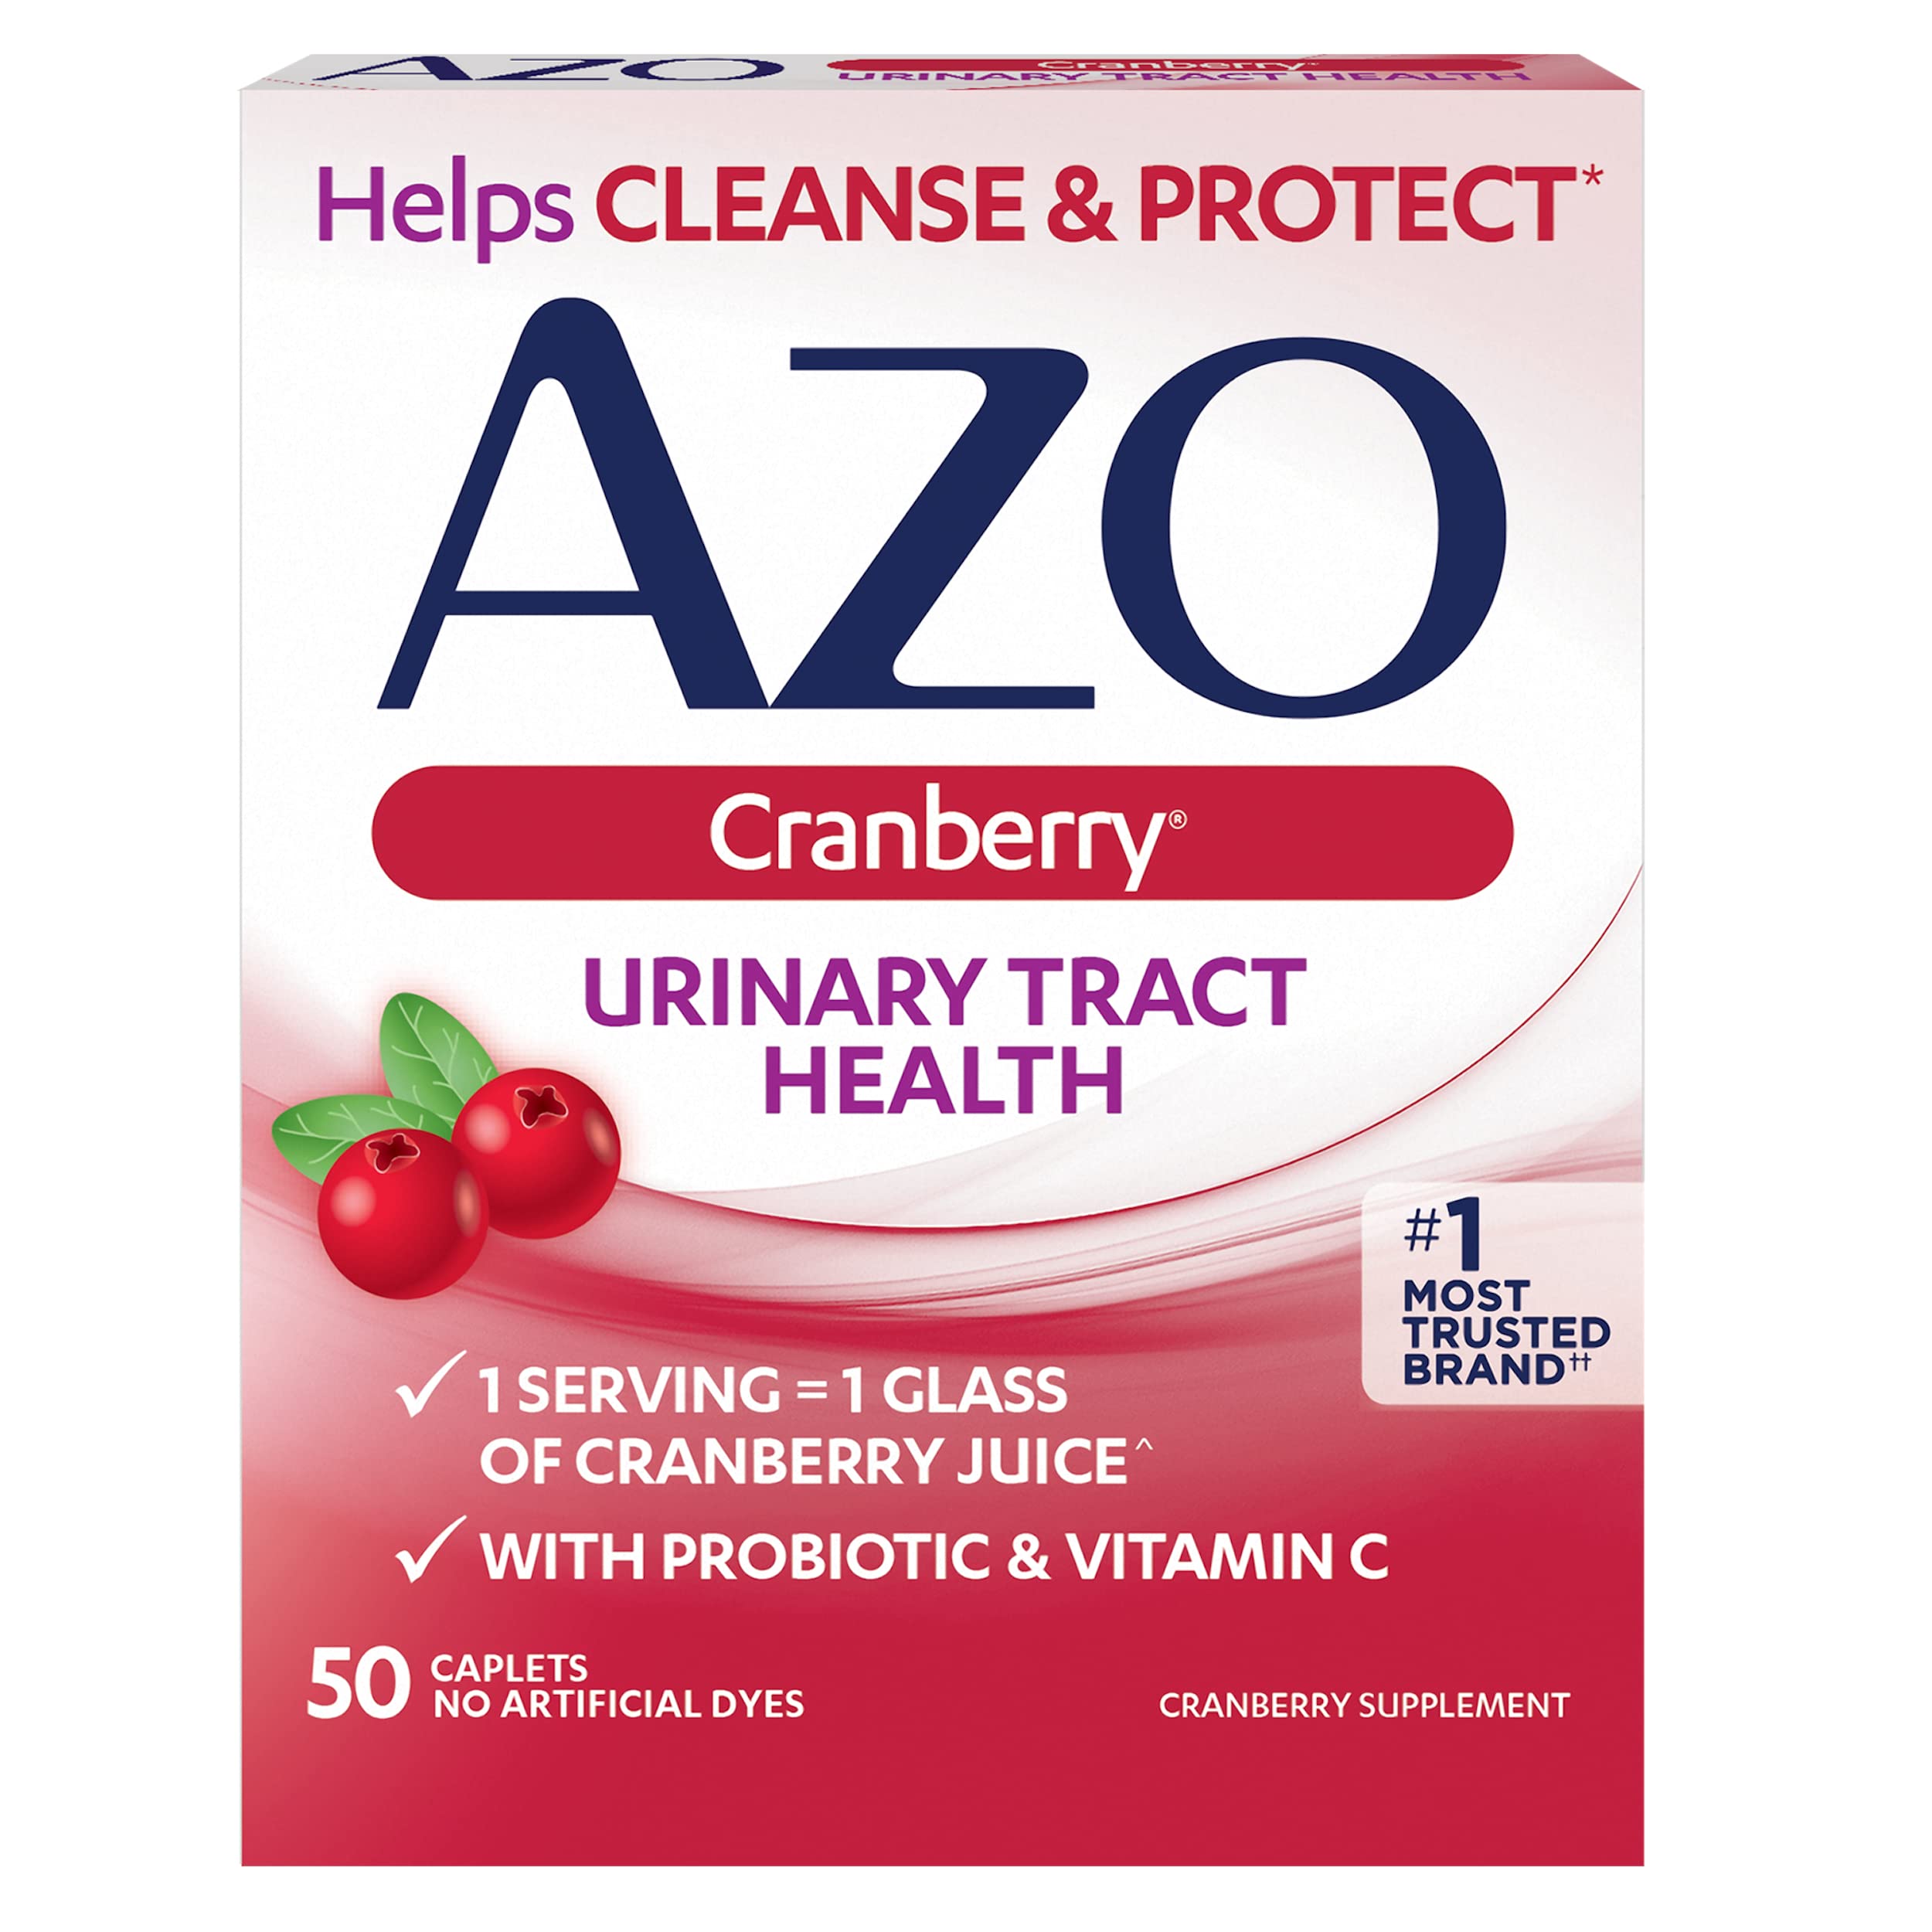 AZO Complete Feminine Balance Daily Probiotics for Women, 30 Count & Cranberry Urinary Tract Health Supplement, 50 Count